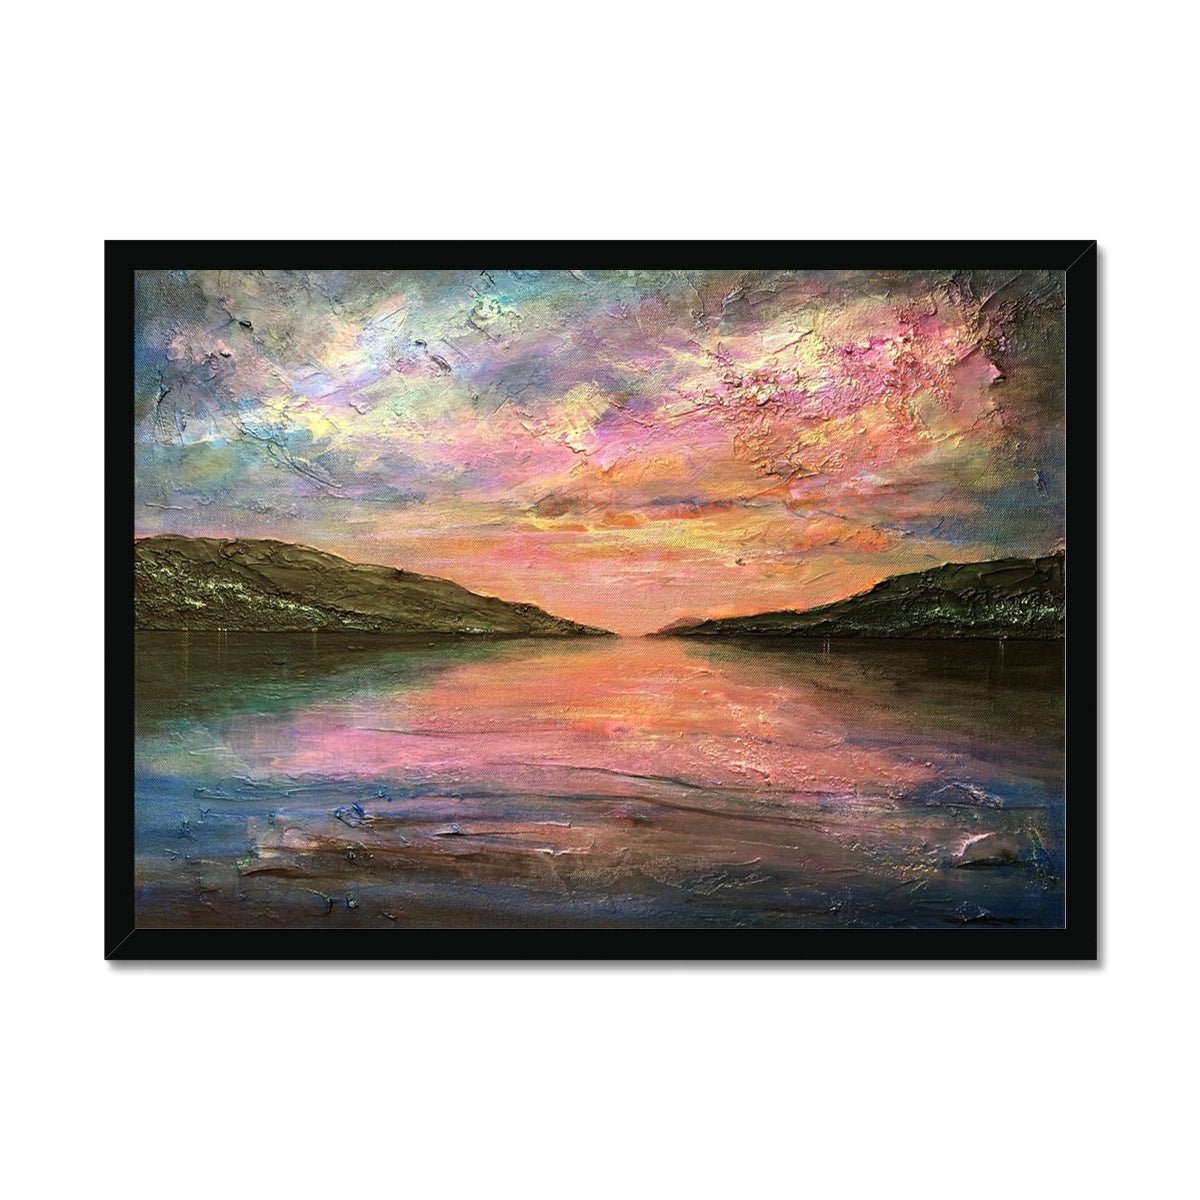 Loch Ness Dawn Painting | Framed Prints From Scotland-Framed Prints-Scottish Lochs & Mountains Art Gallery-A2 Landscape-Black Frame-Paintings, Prints, Homeware, Art Gifts From Scotland By Scottish Artist Kevin Hunter